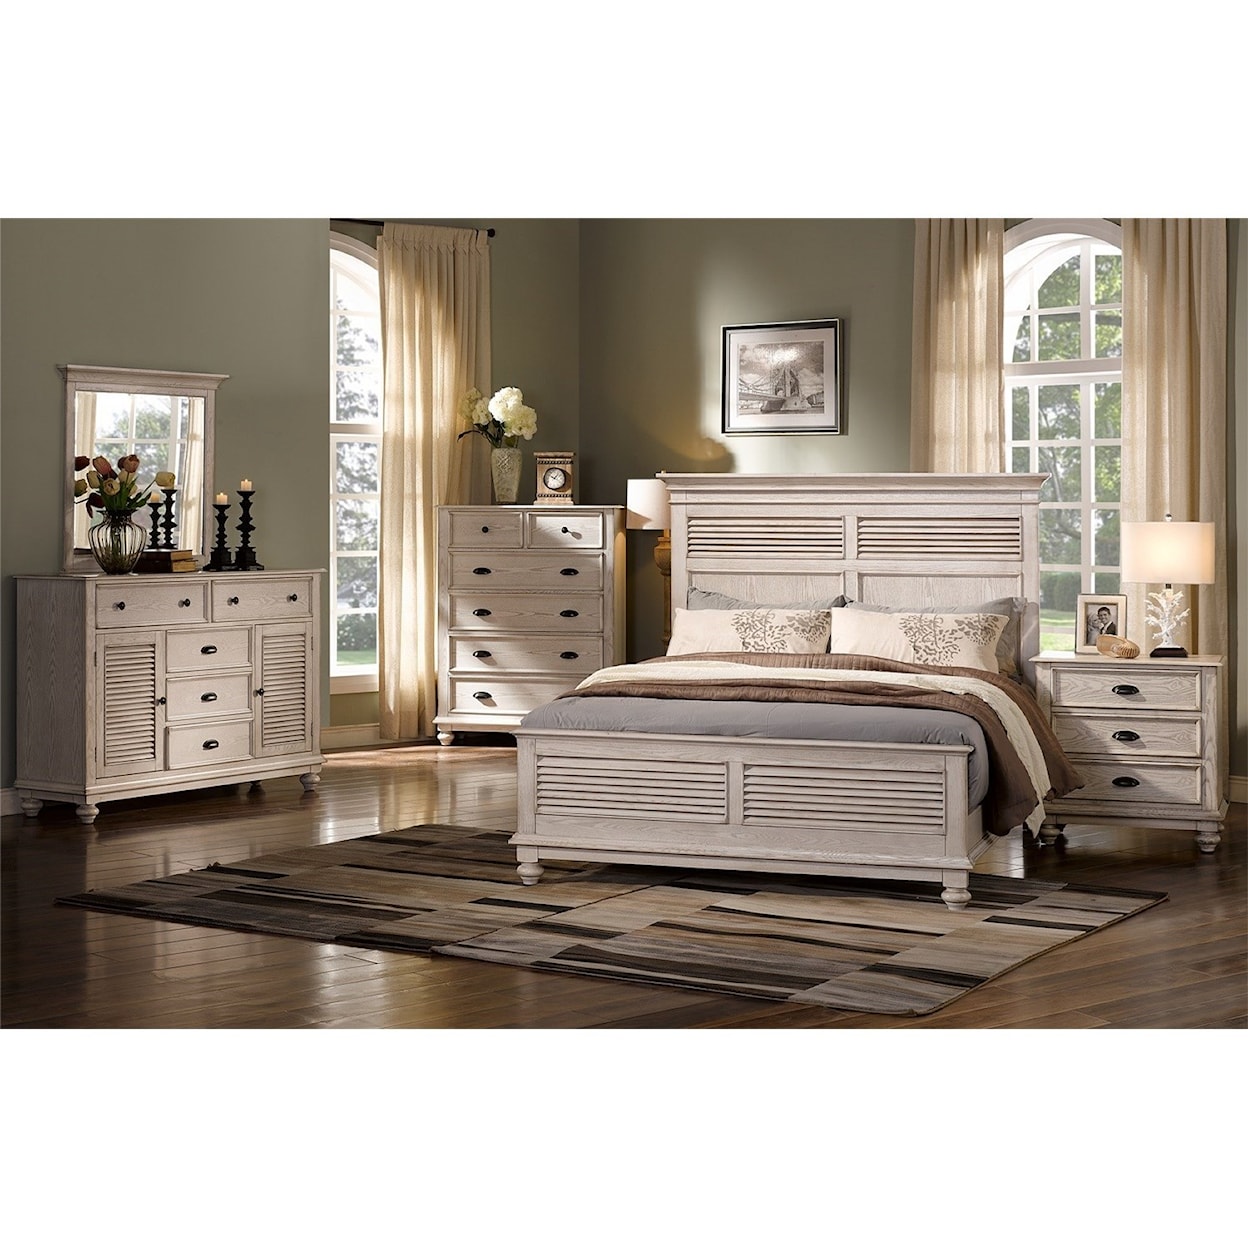 New Classic Lakeport King Bedroom Group